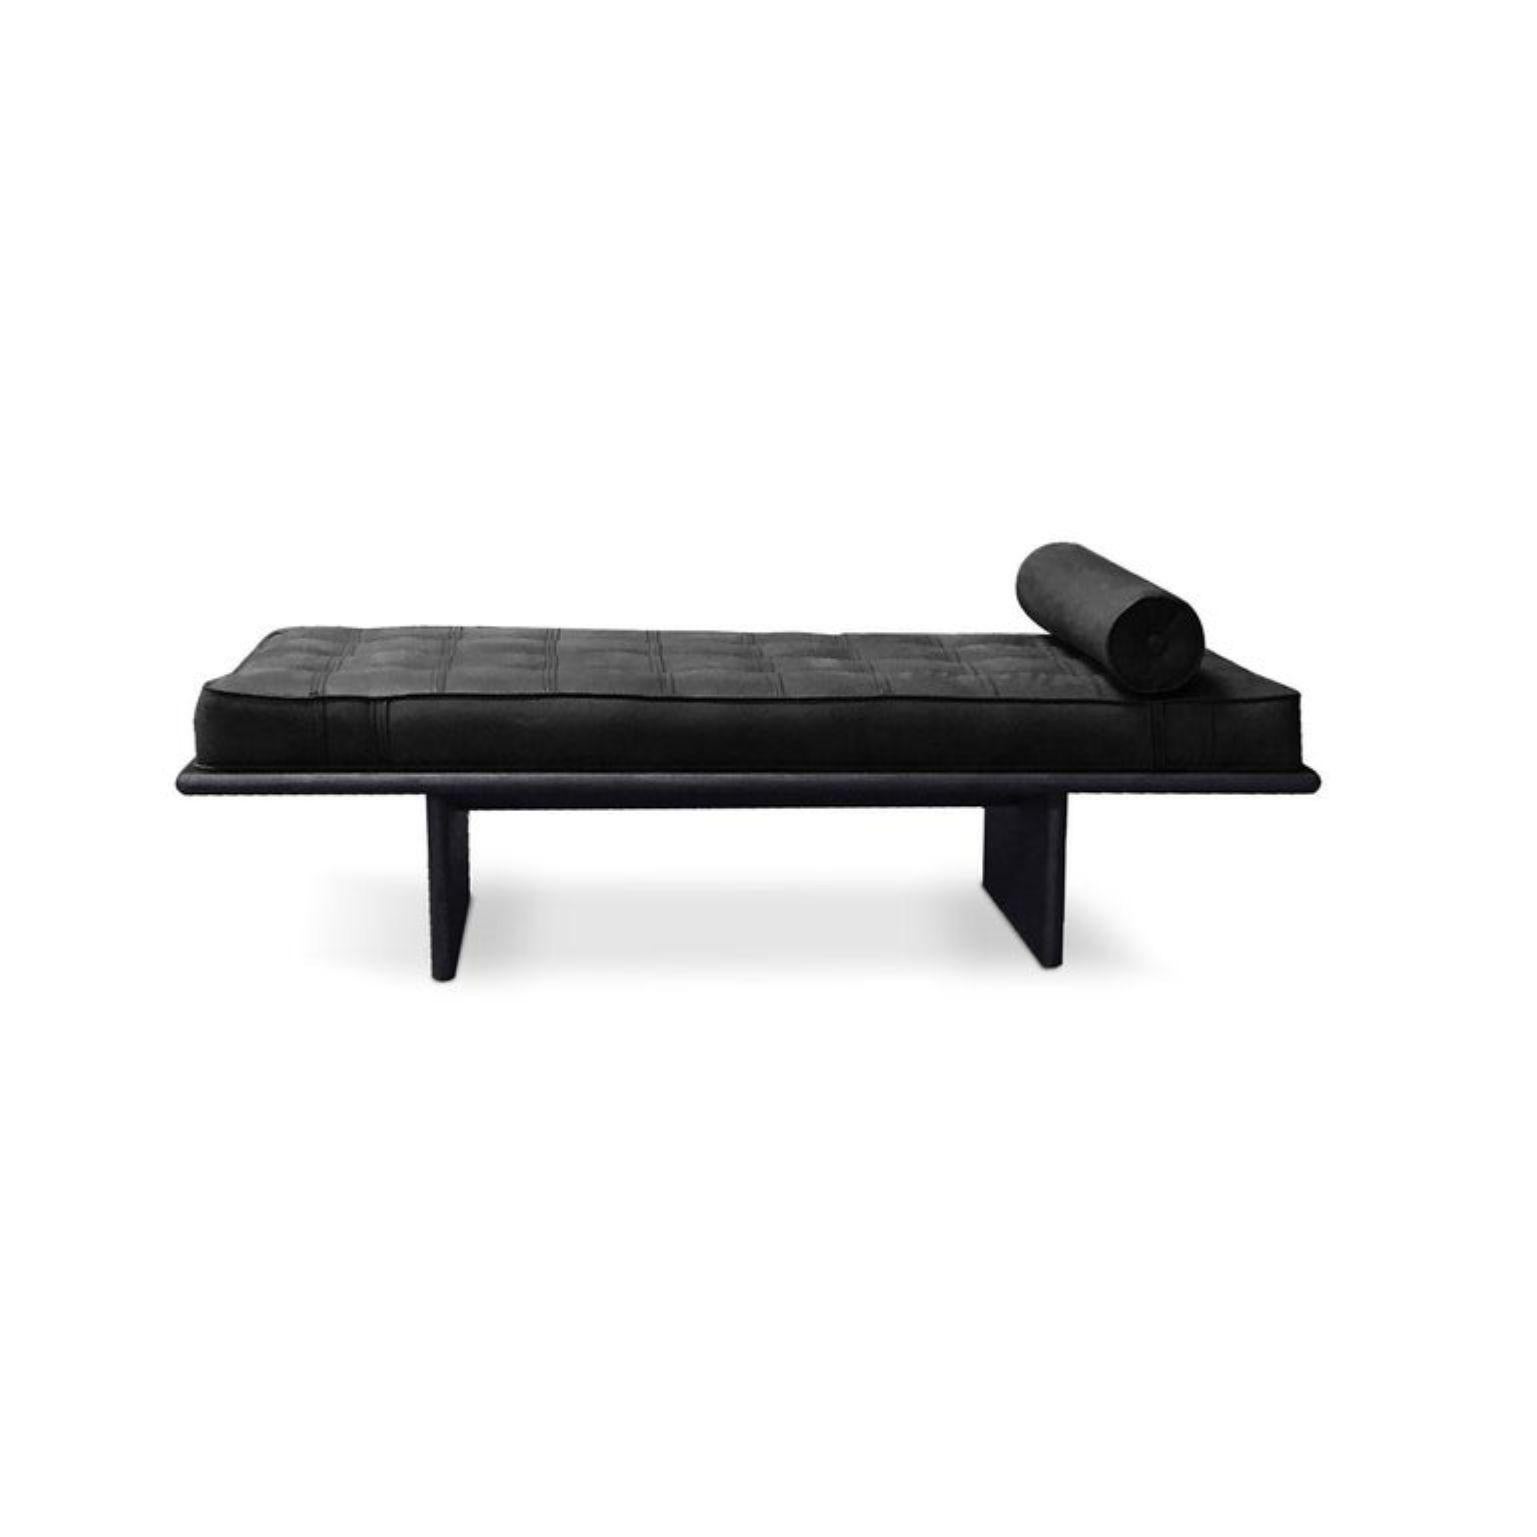 Frederic daybed by Collector
Materials: Structure in solid oak wood. Upholstered in genuine Sequoia 4003 leather
Dimensions: W 190 x D 90 x H 50 cm 

Frederic daybed it’s inspired by Japanese minimalism. With simple and clean structure, combined